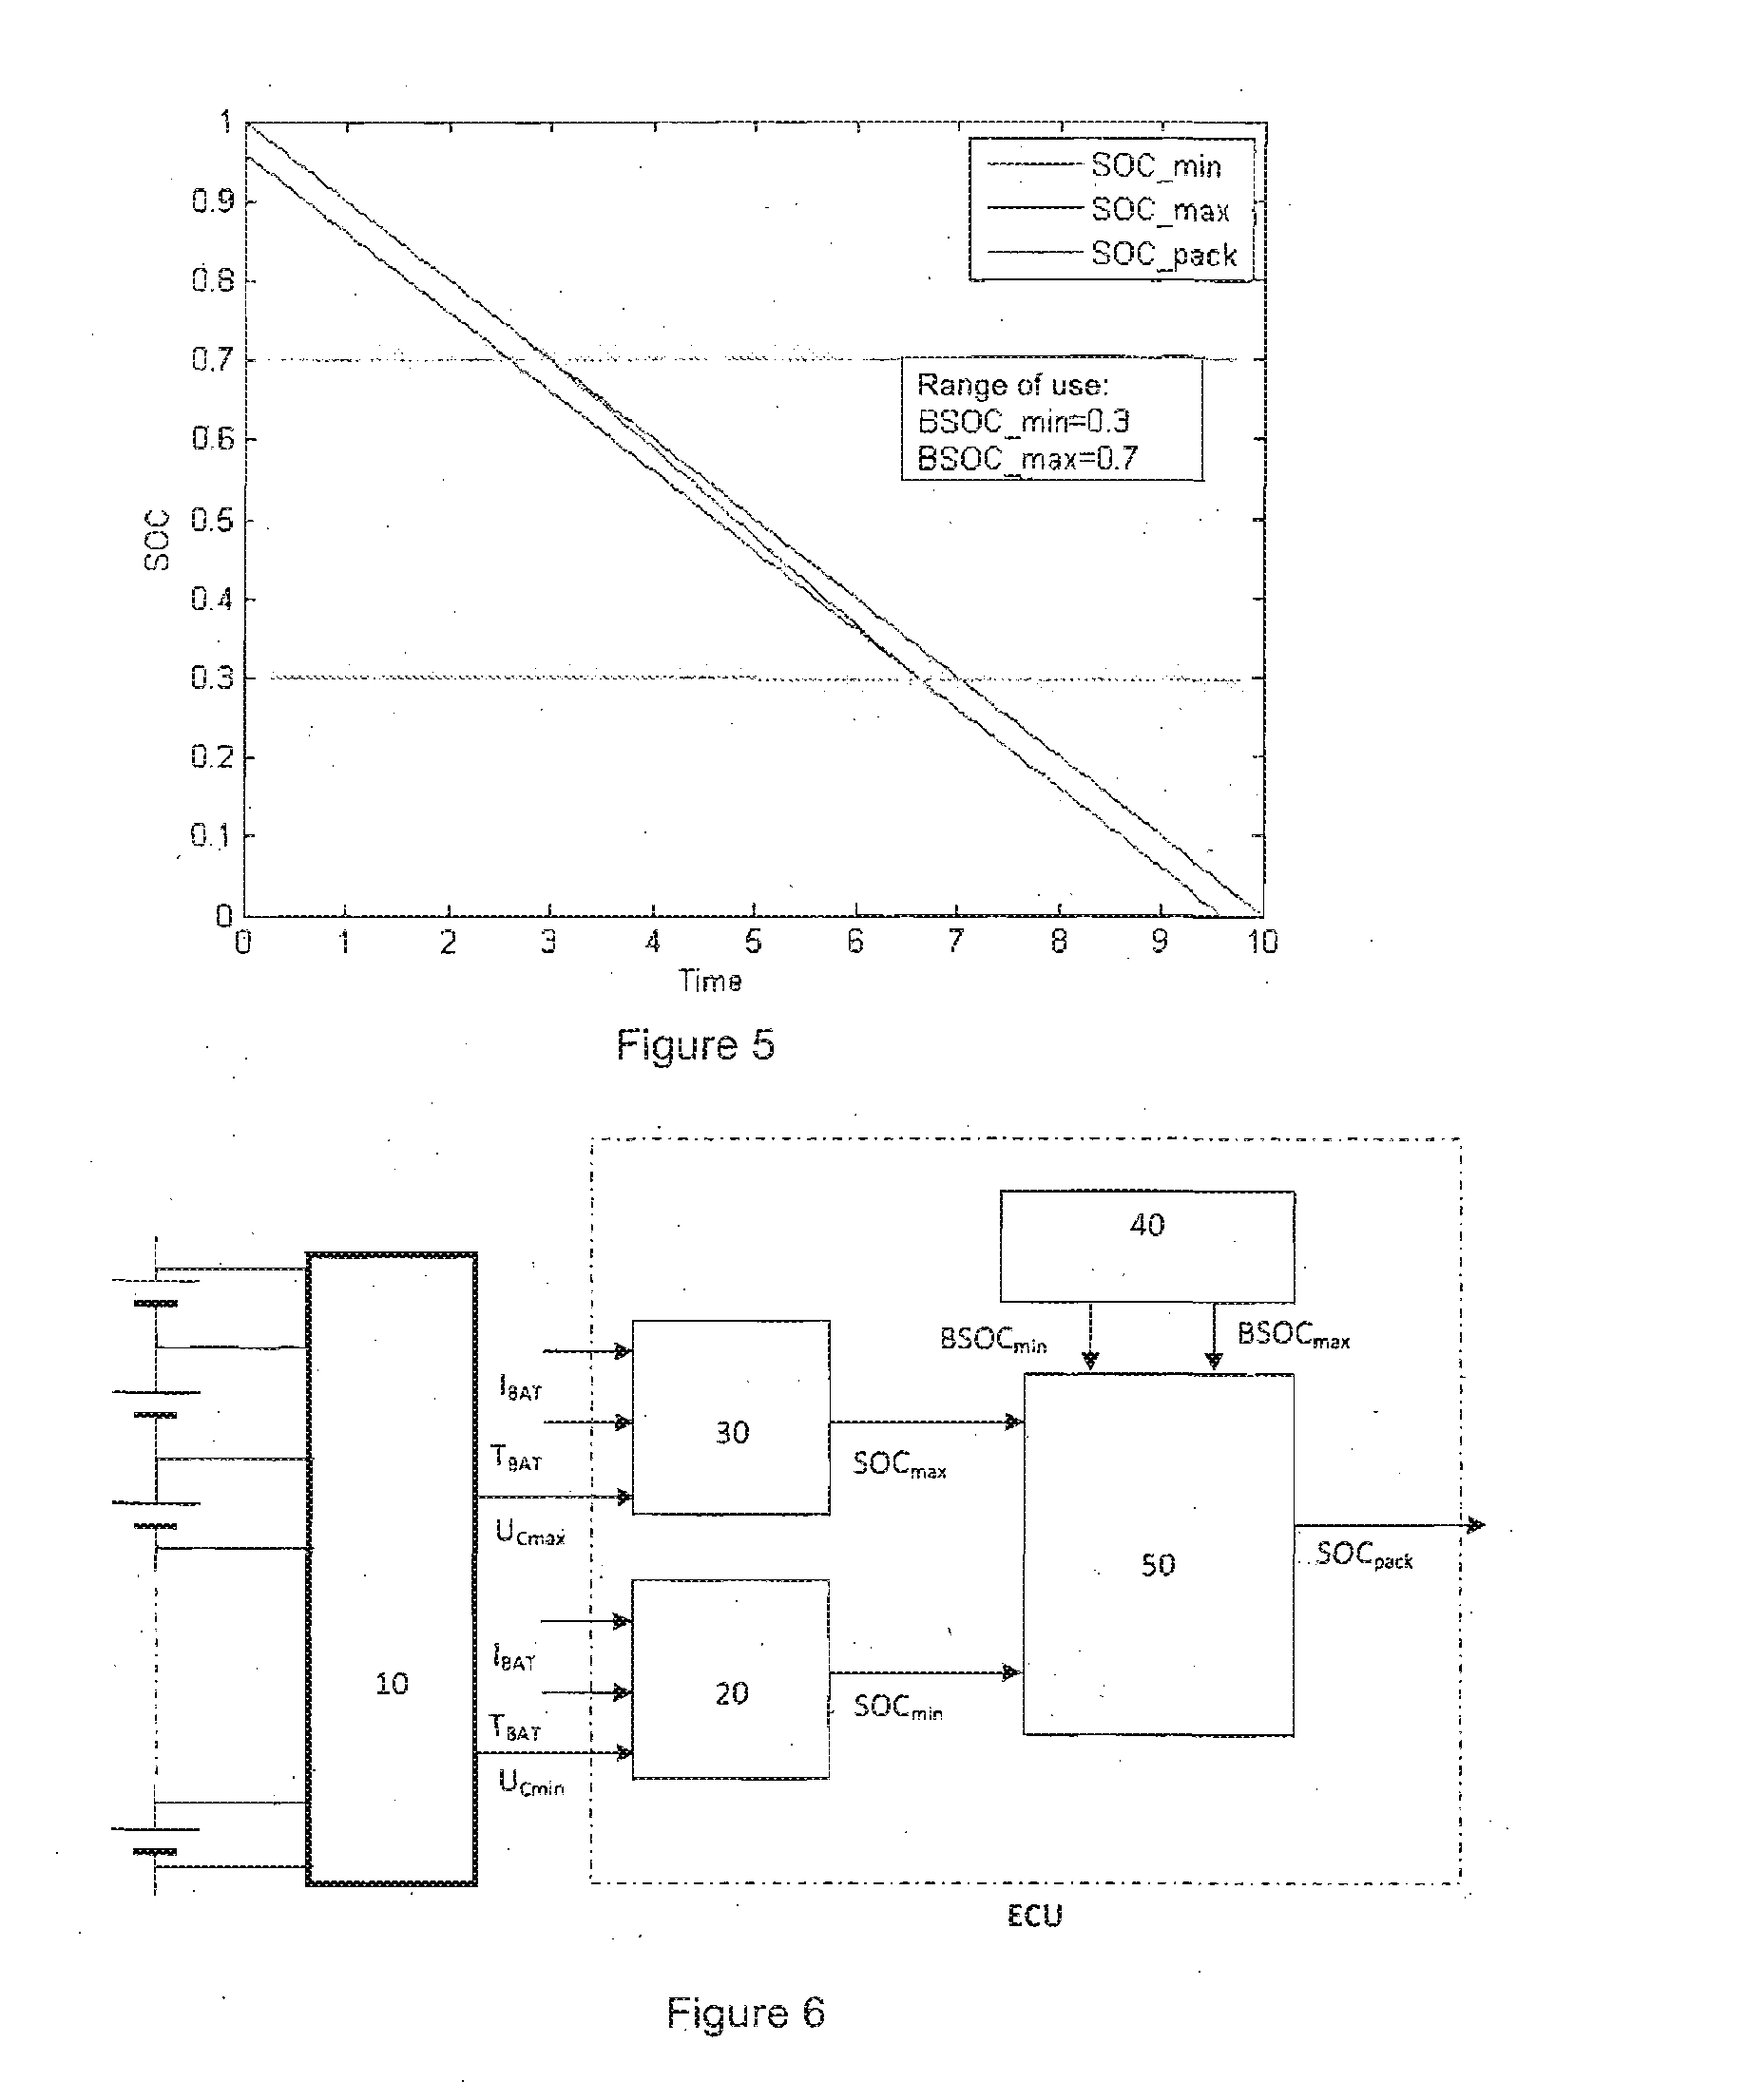 Method for assessing a state of charge of a battery comprising a plurality of cells having a variable range of use of state of charge